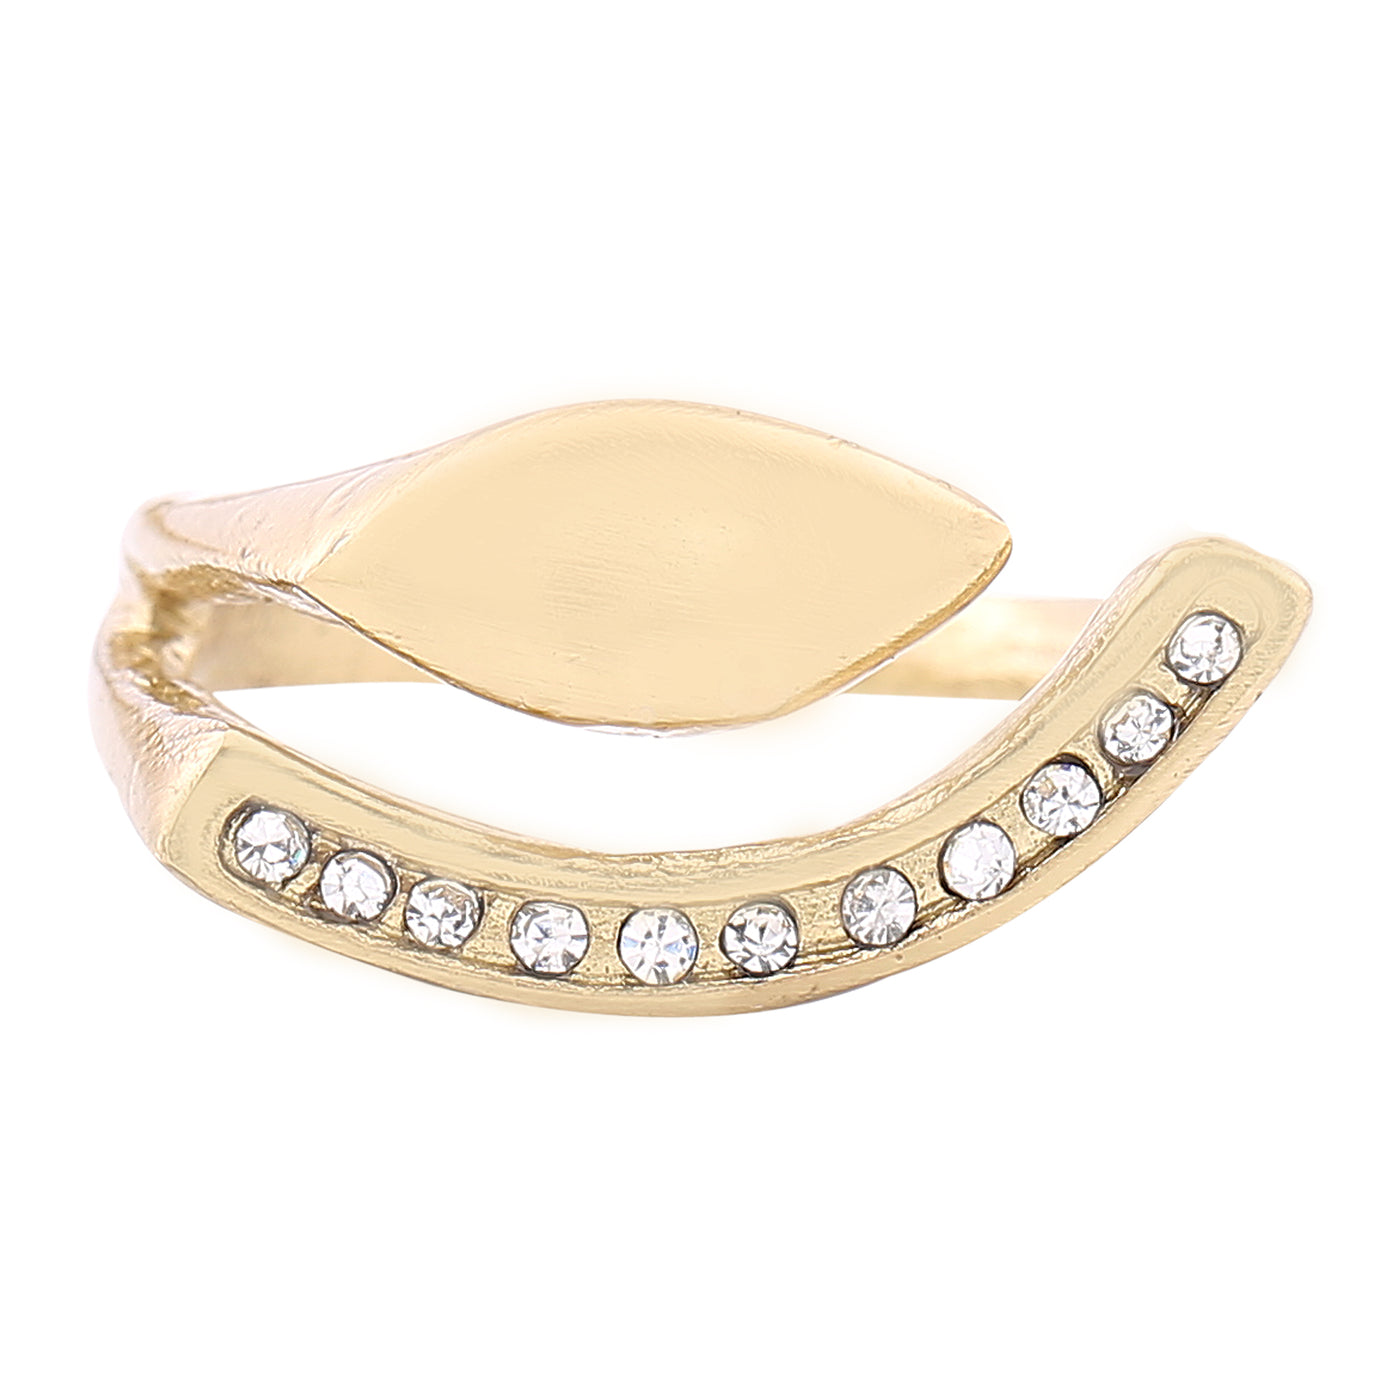 Estele gold plated ring latest design with white stones for women (non adjustable)